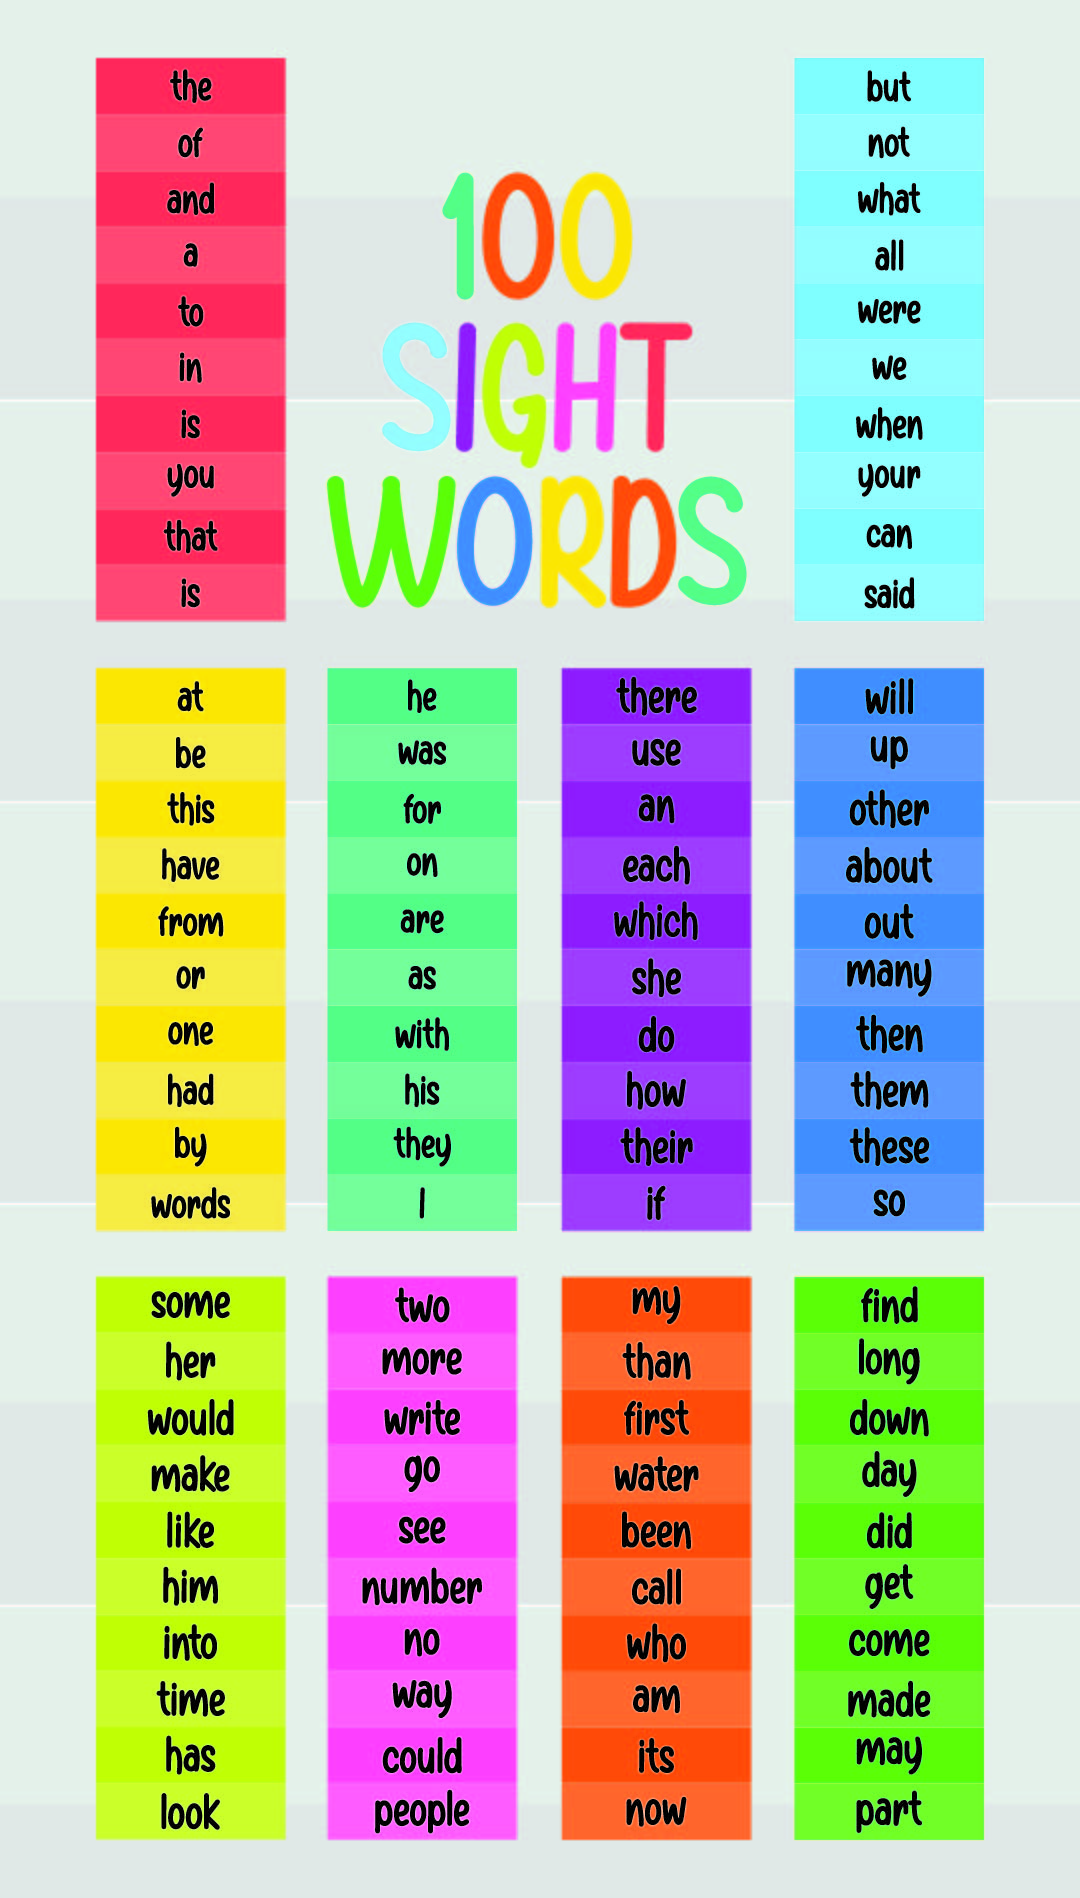 9-best-images-of-first-100-fry-words-printable-printable-fry-sight